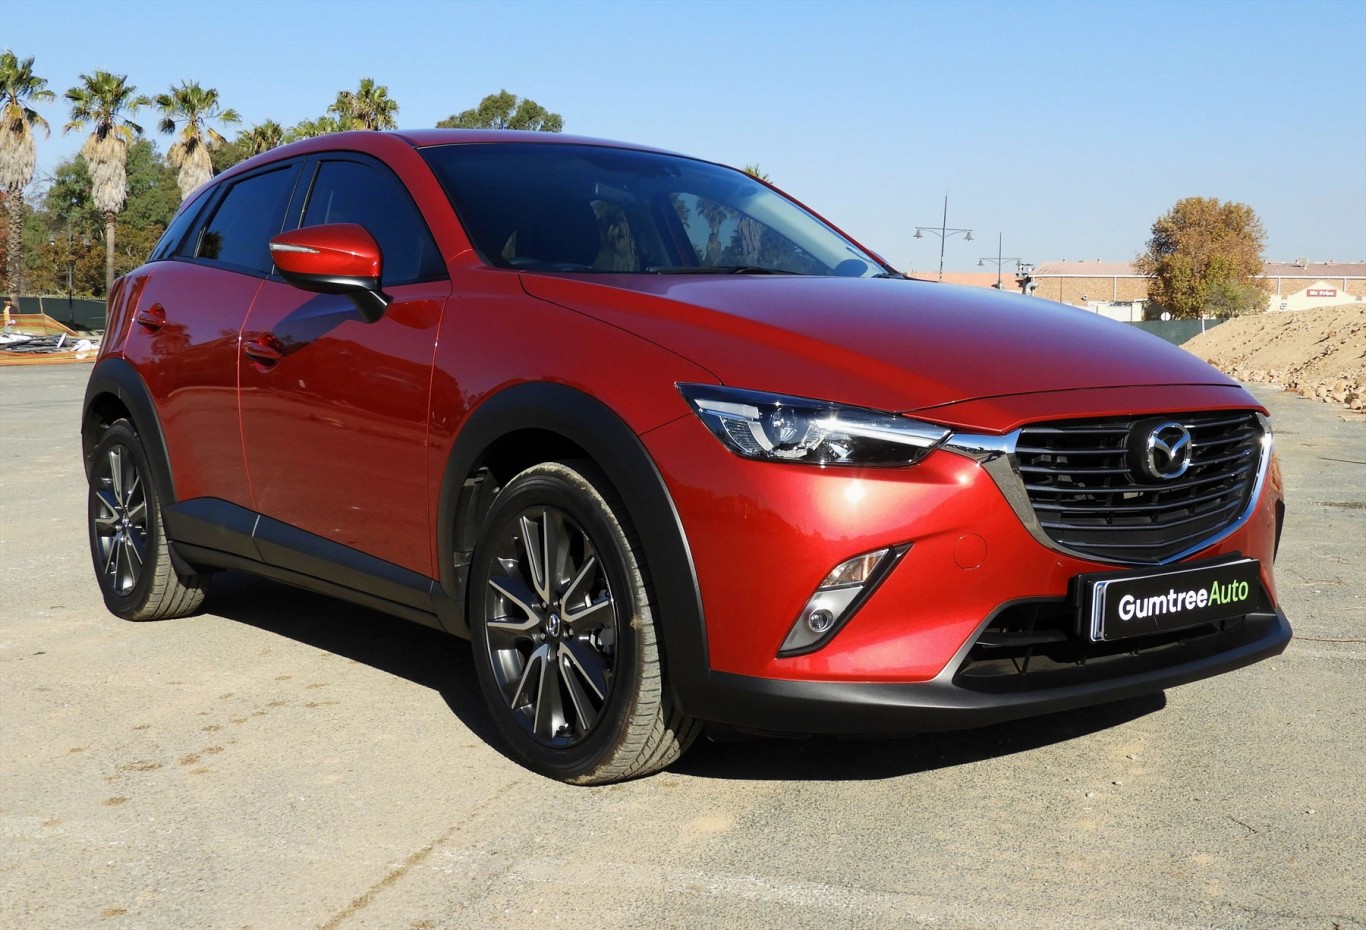 Mazda takes double honours at the 2018 Gumtree Pre-Owned Vehicle Awards